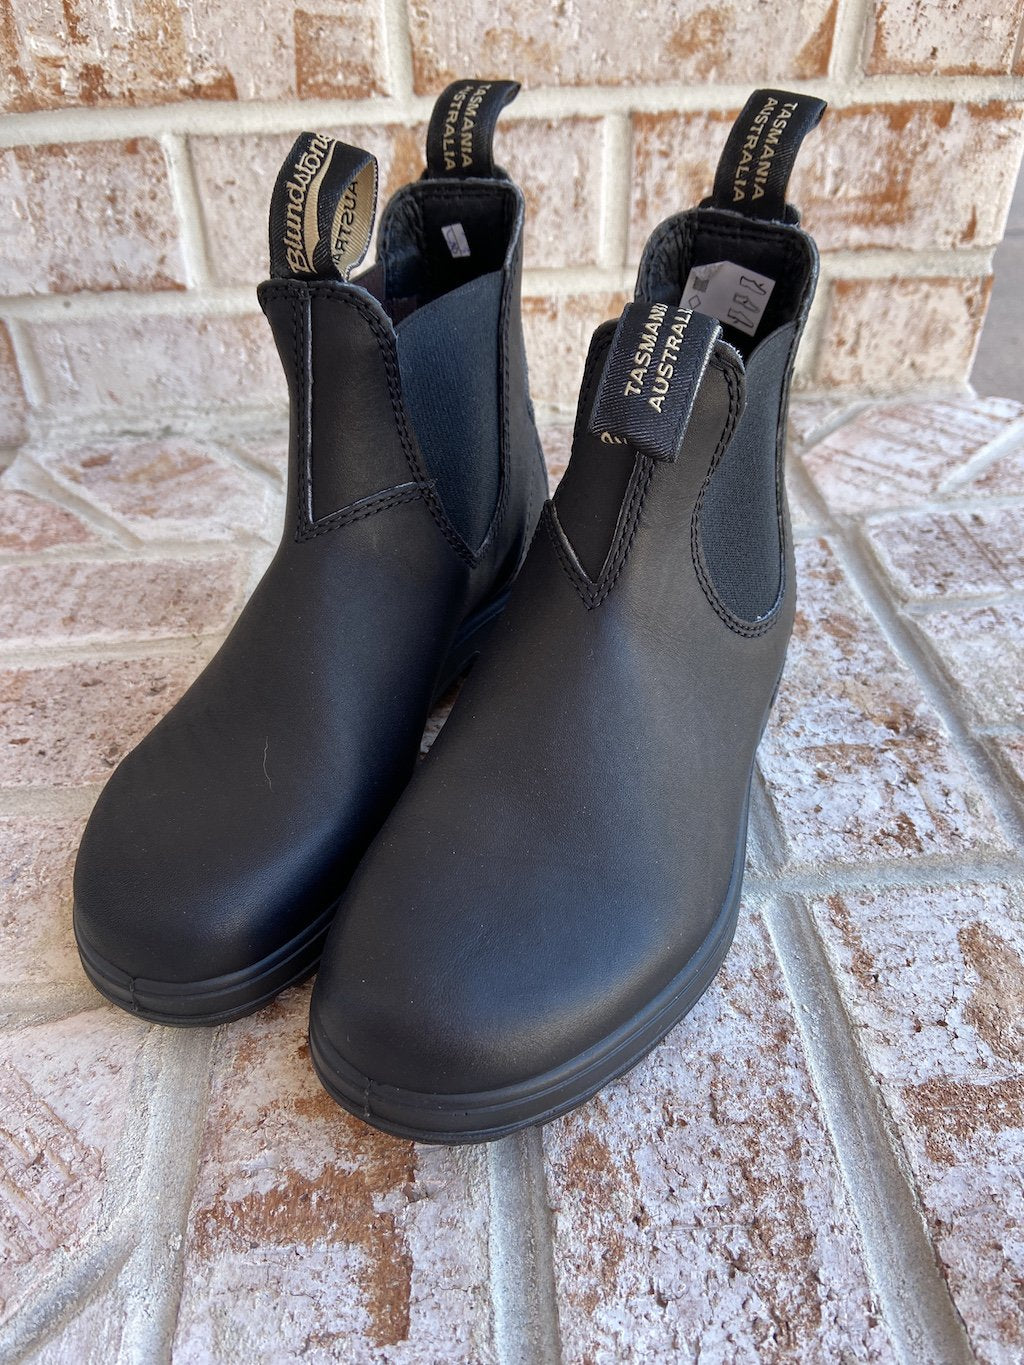 blundstone 510 boots